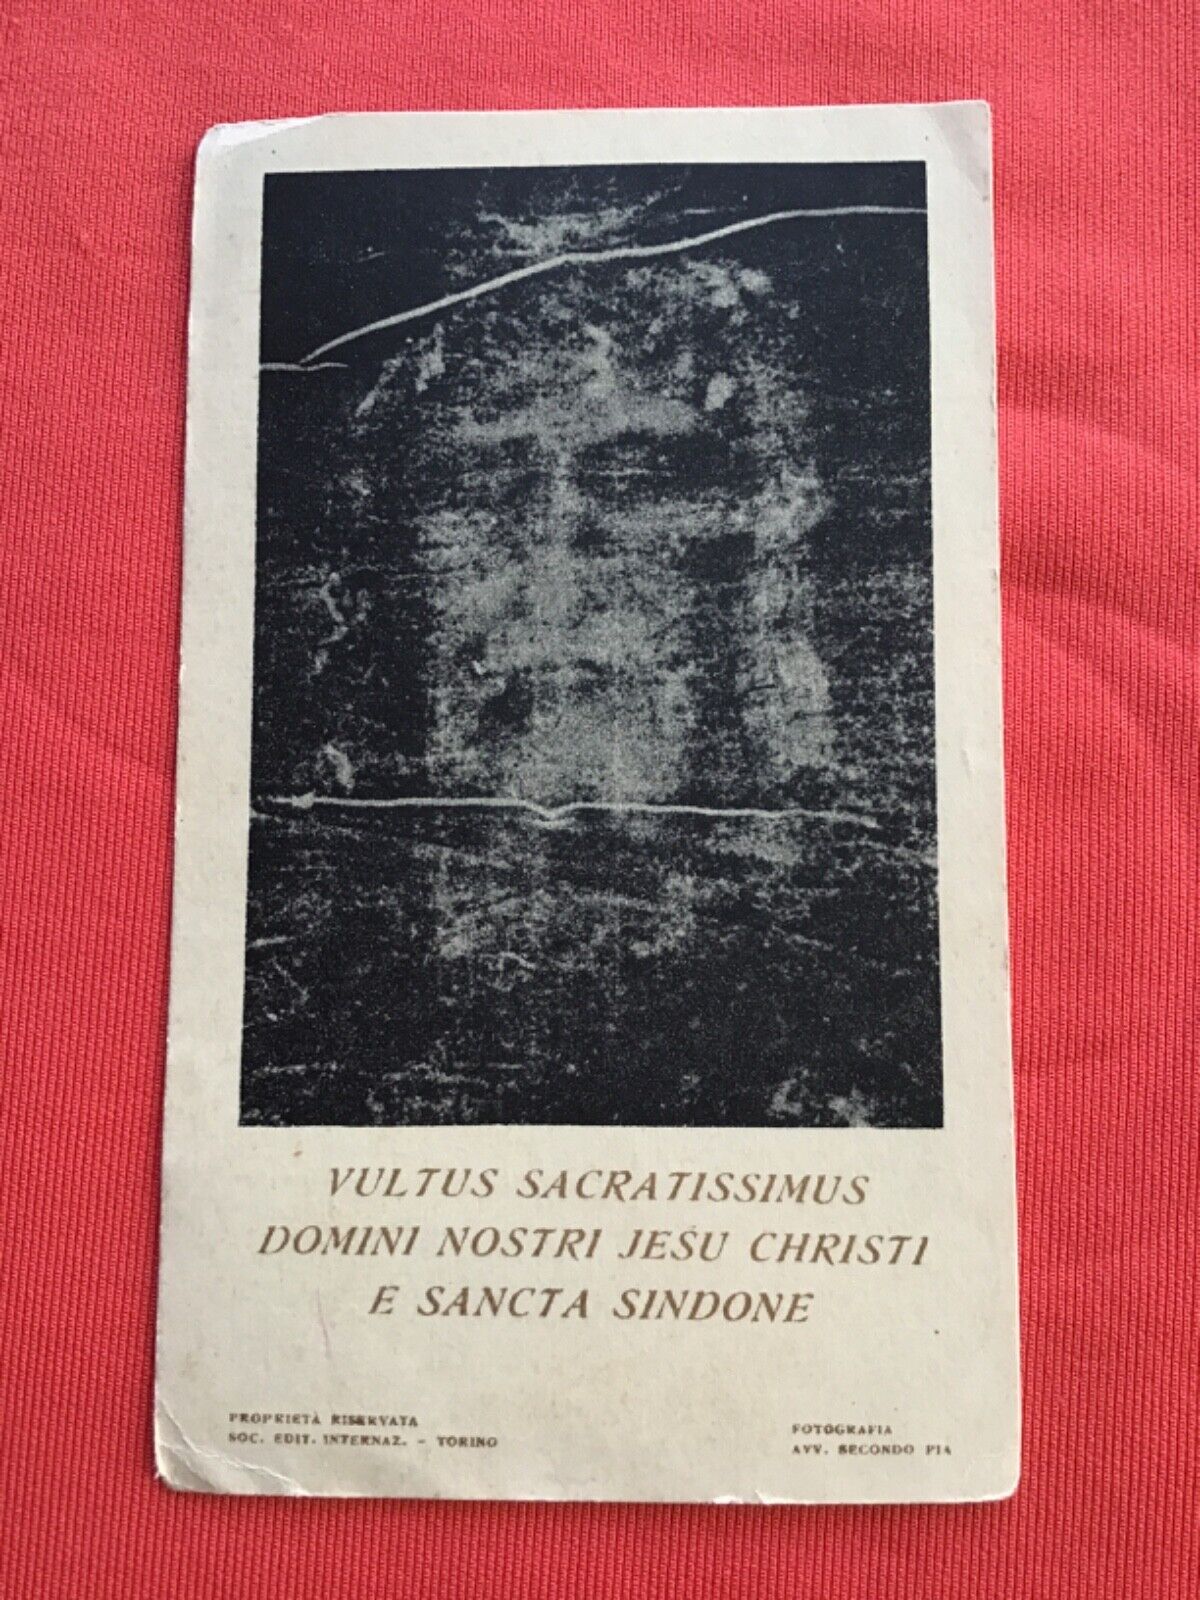 Antic relic of S. Sindone Holy shroud of Turin touched to the original 1901